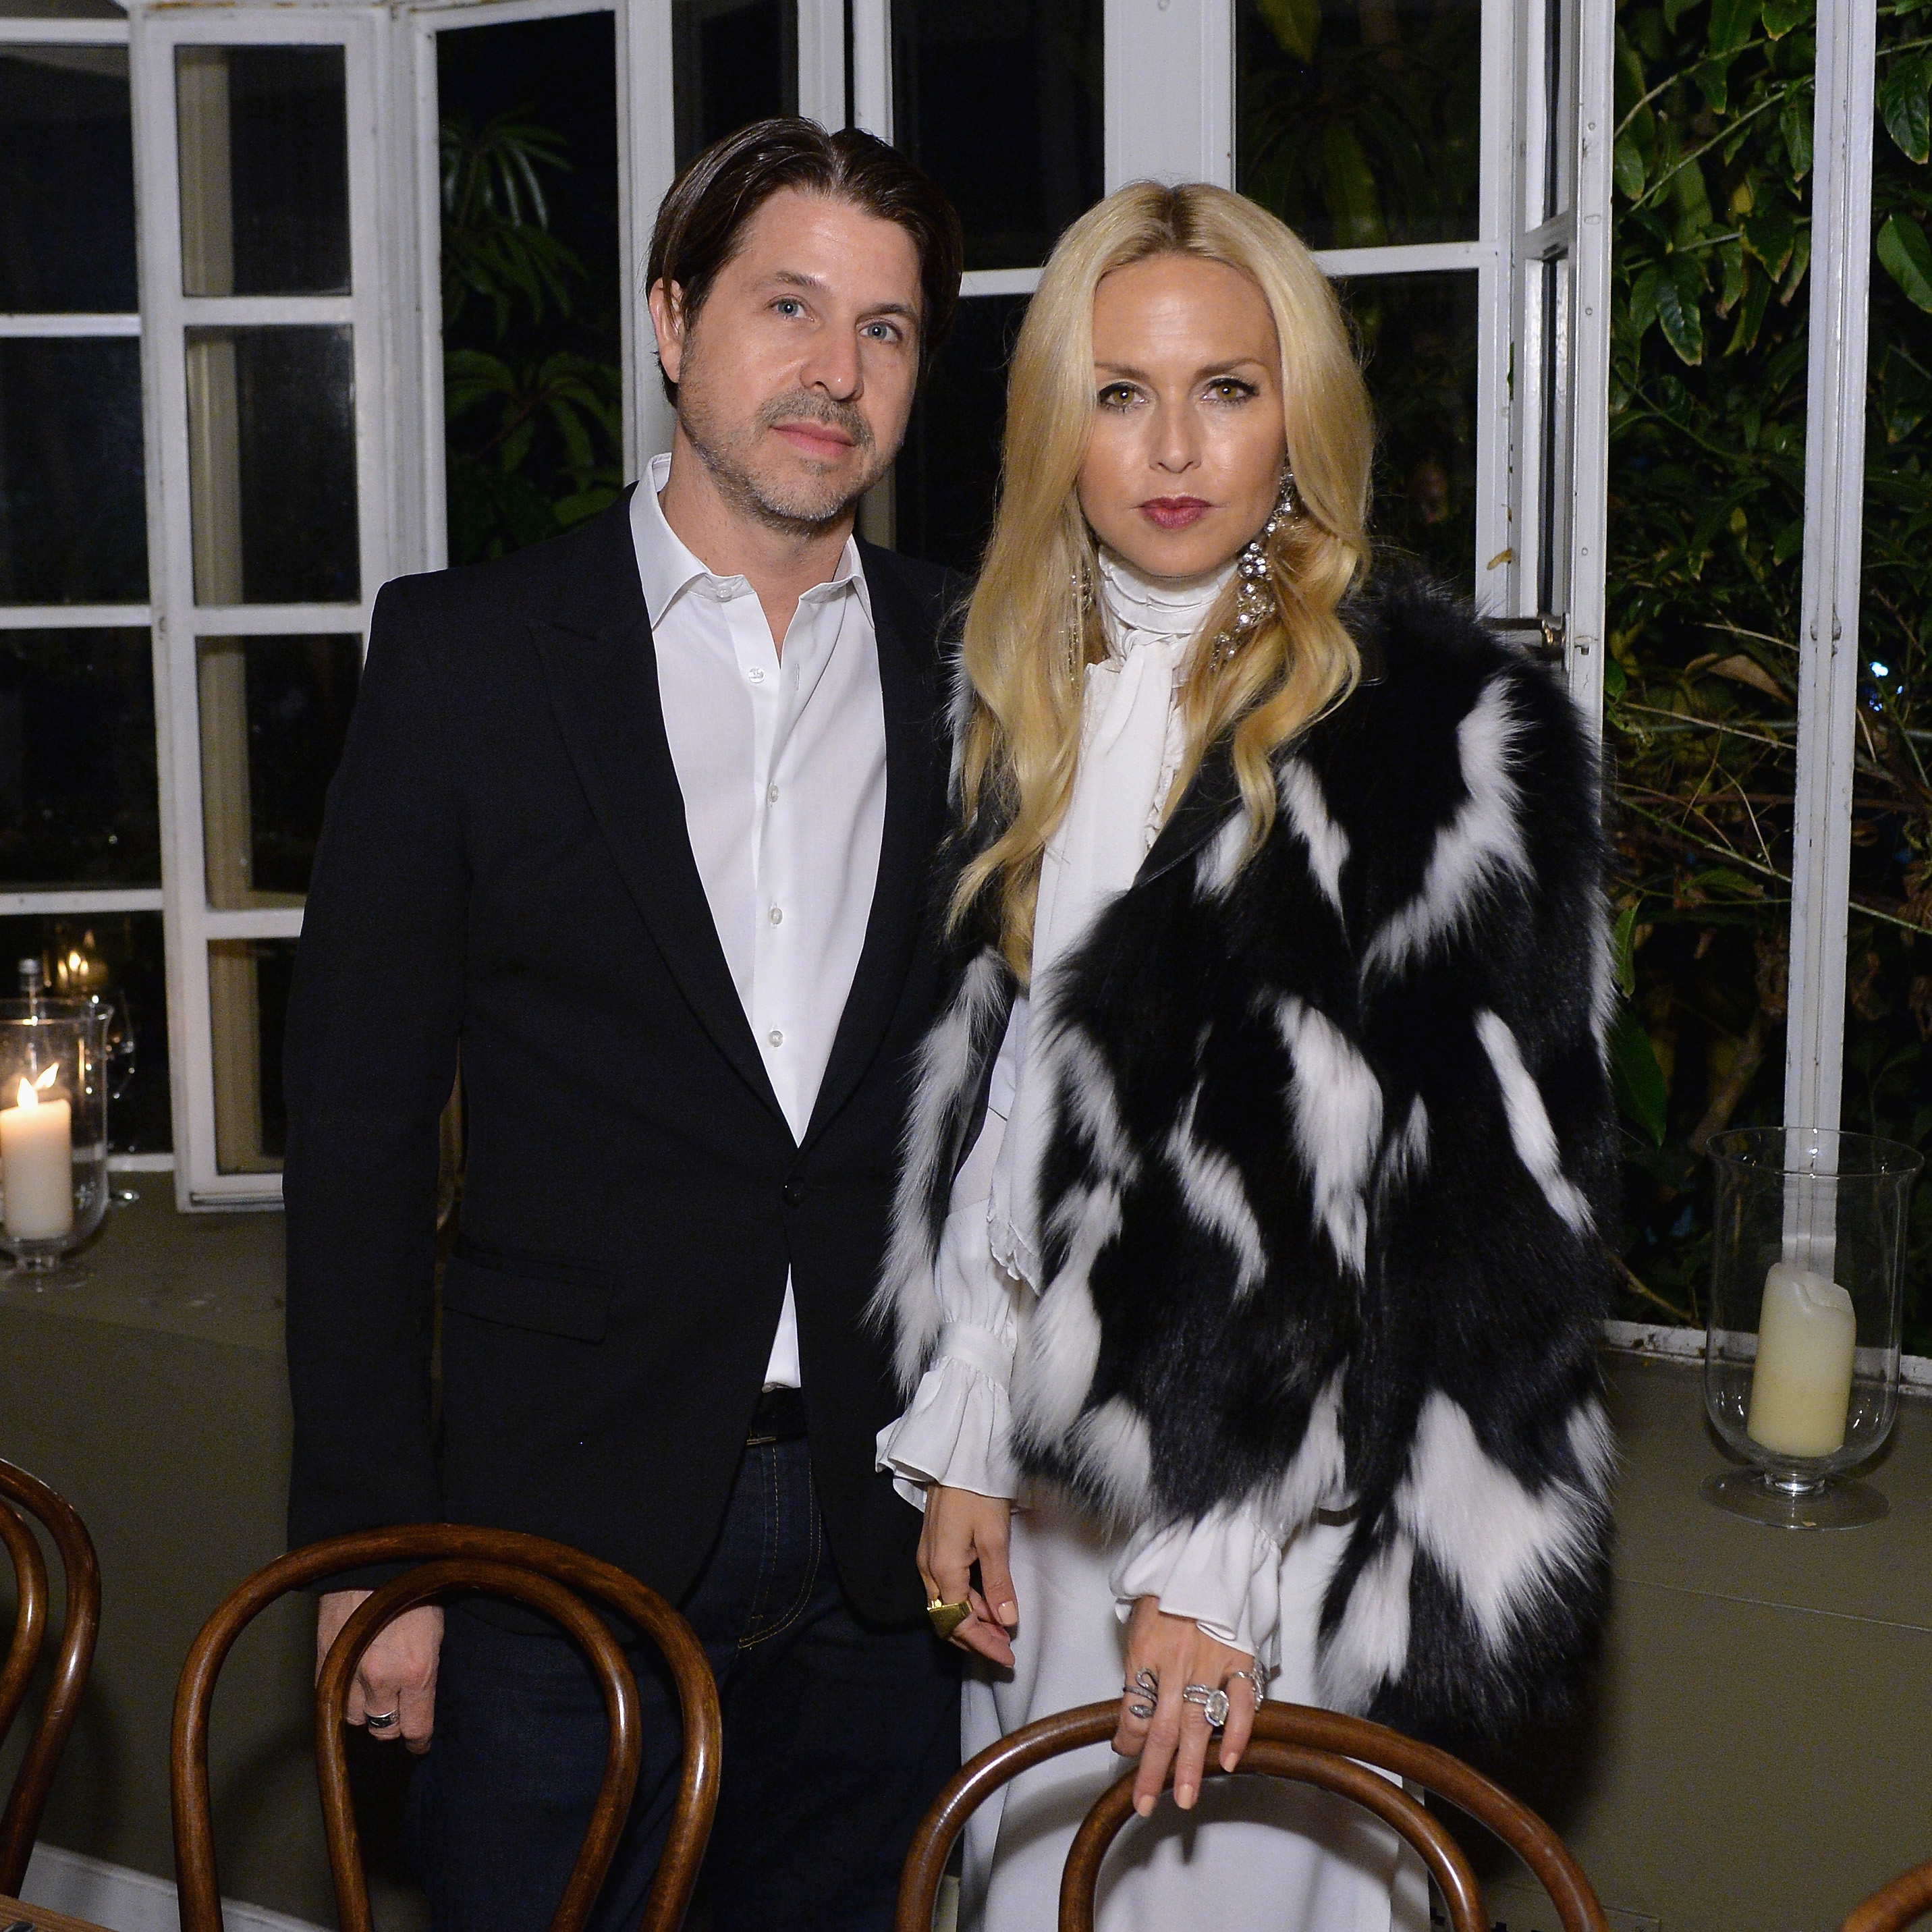 Rachel Zoe looks glamorous as she and husband Rodger Berman attend a Chanel  event in the Hamptons